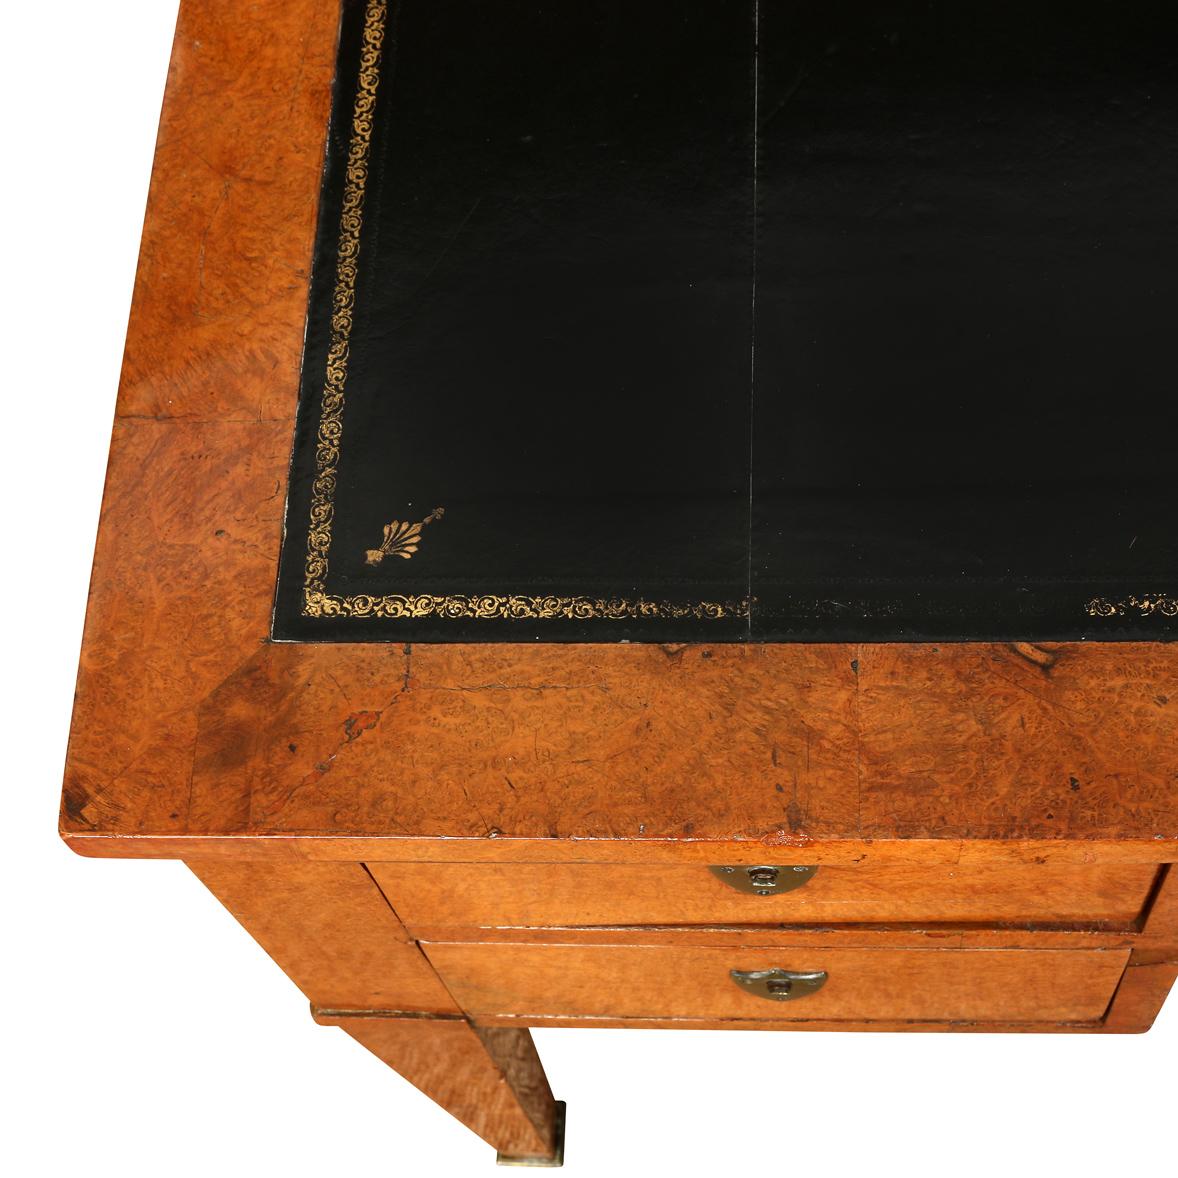 A vintage walnut Biedermeier writing desk with an embossed leather inlay top. The Biedermeier style, known for its clean lines and simplicity, is elegantly showcased in this writing desk. The design is both classical and versatile, making it